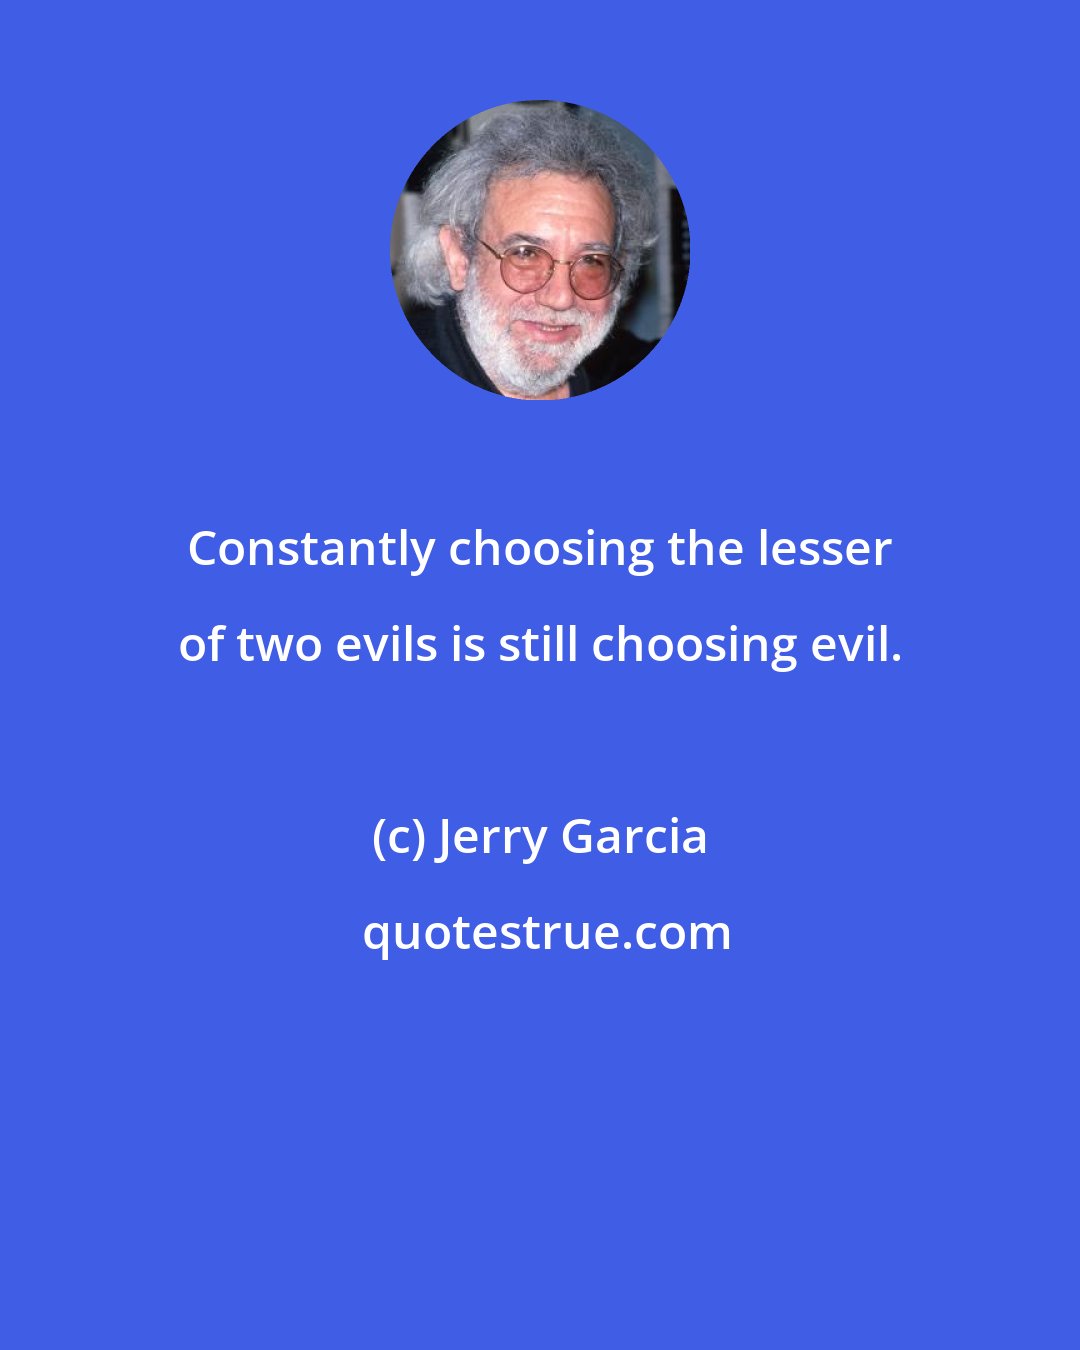 Jerry Garcia: Constantly choosing the lesser of two evils is still choosing evil.